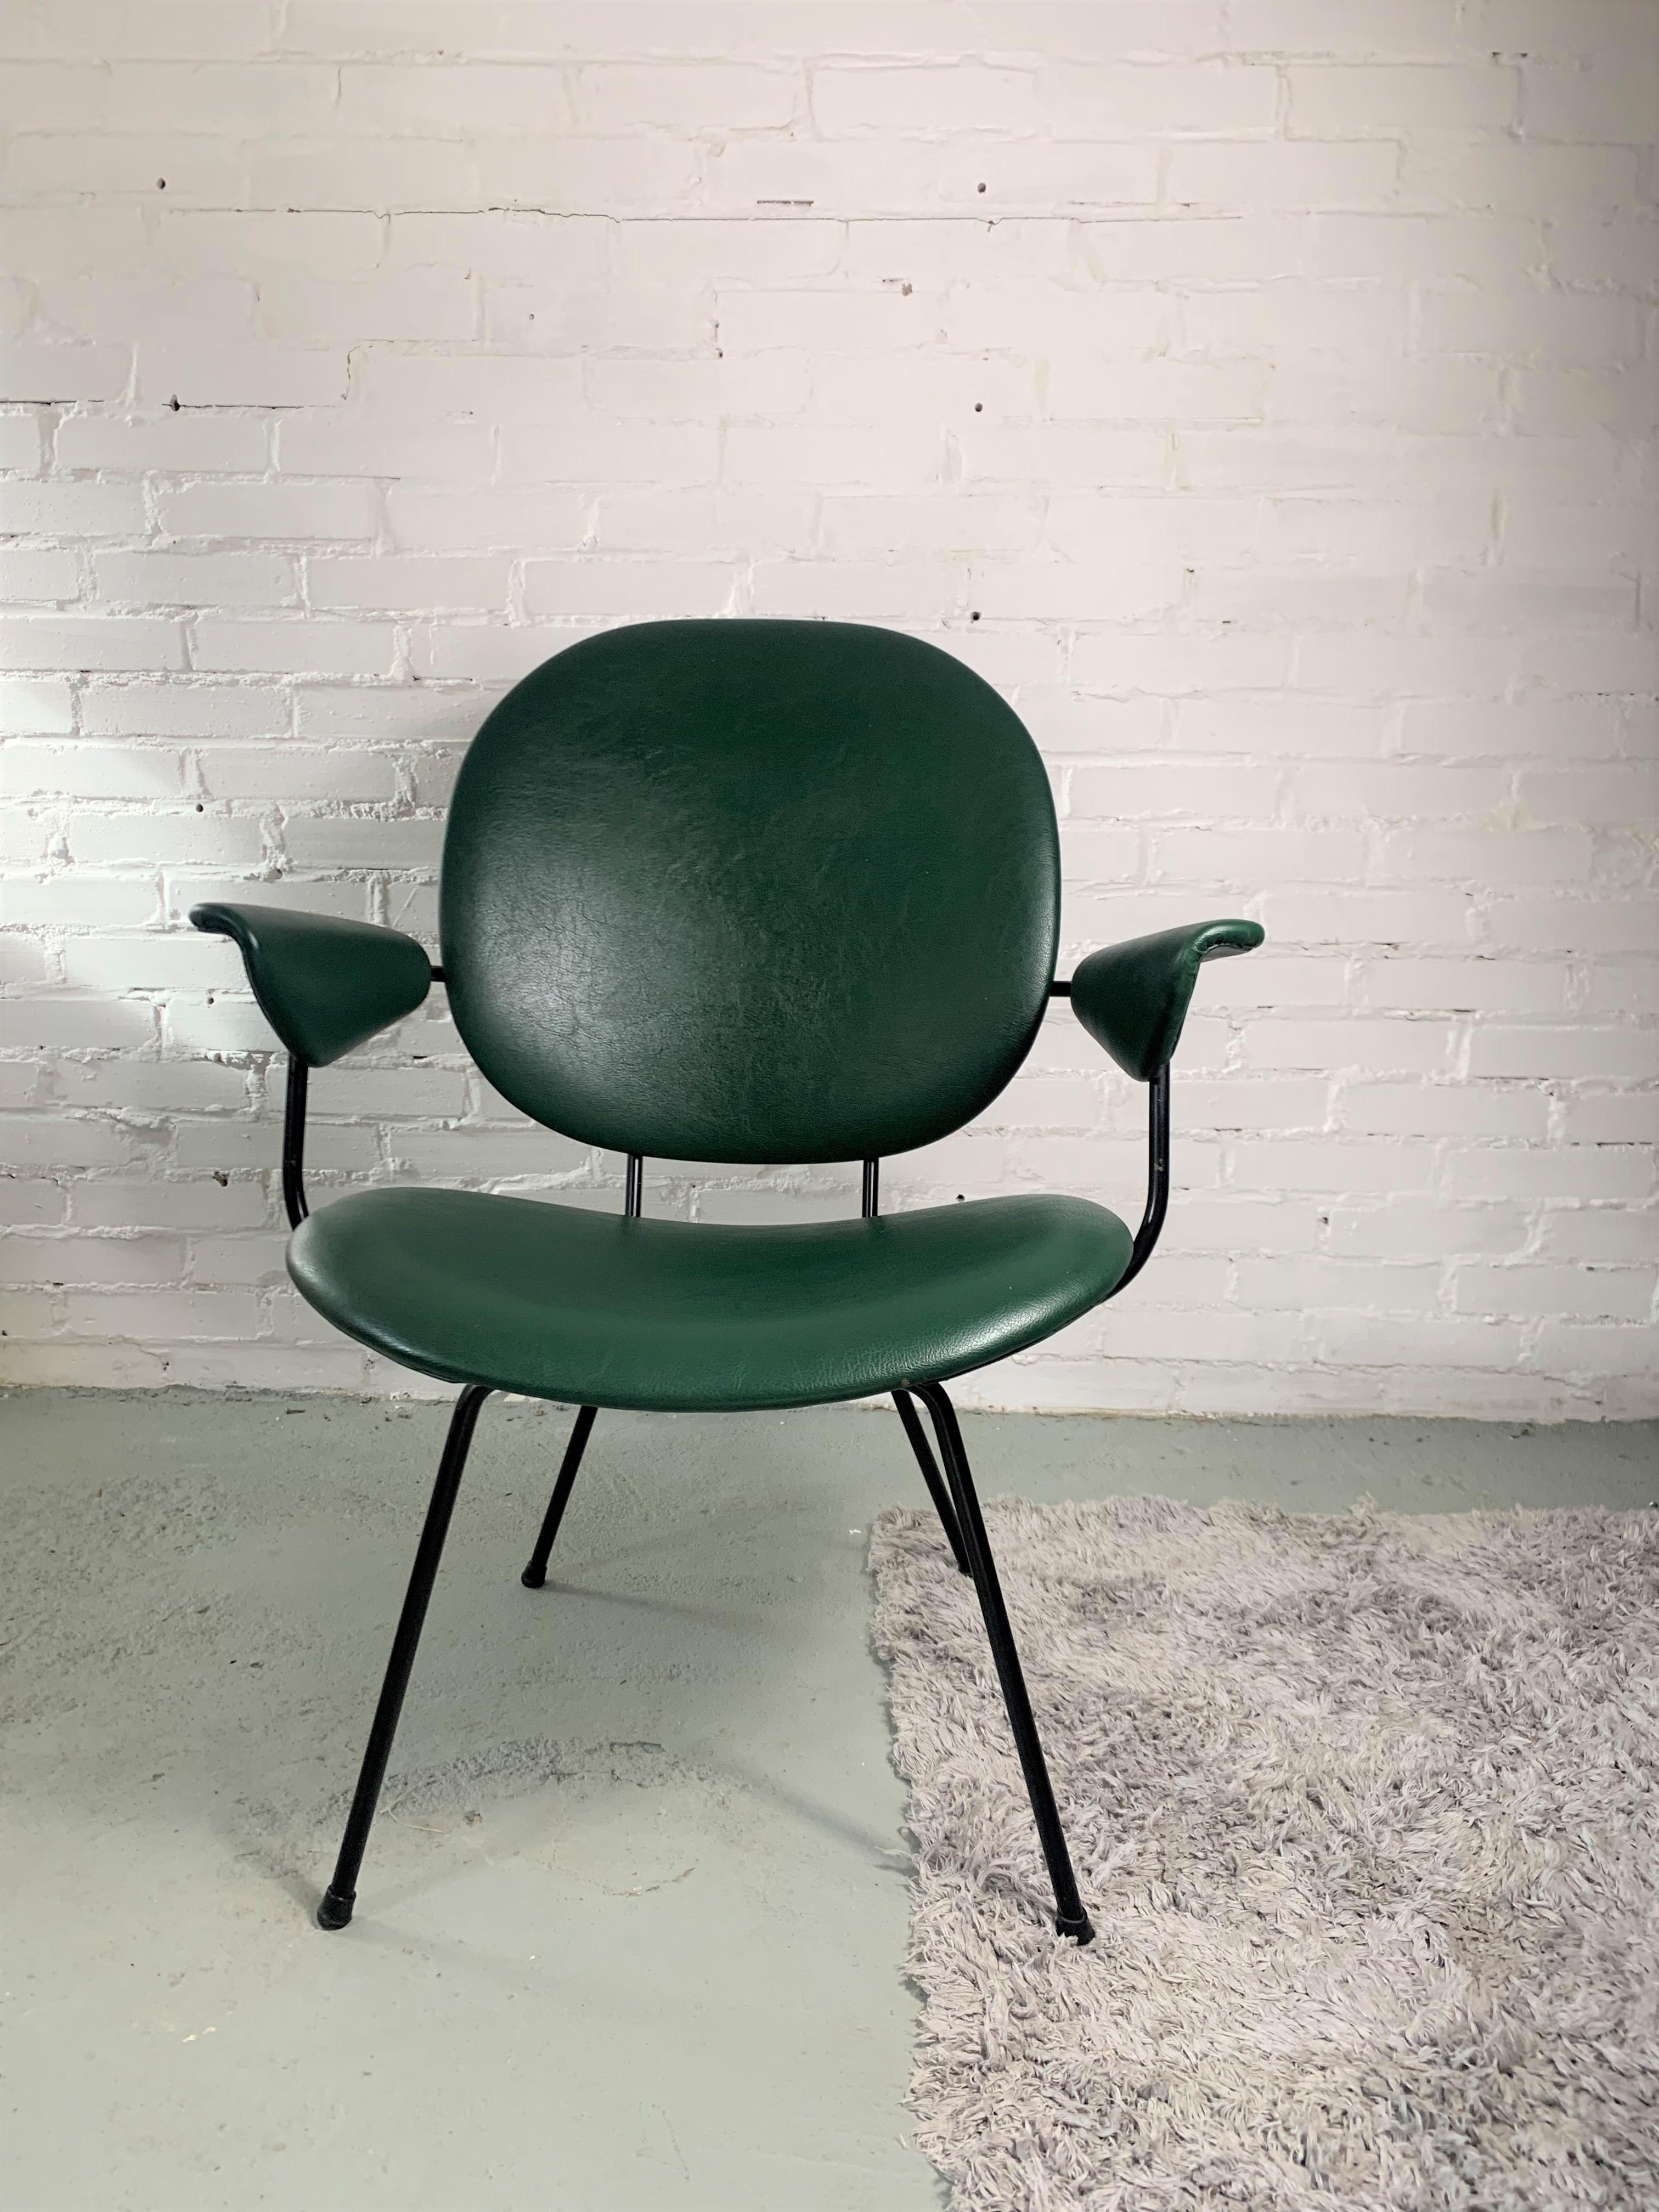 This easy chair model 302 was designed by W.H. Gispen for Kembo in the 1950s. The chair features a tubular metal frame and is upholstered in green vinyl. The chair is in a good vintage condition. It is not later edition but original piece from the